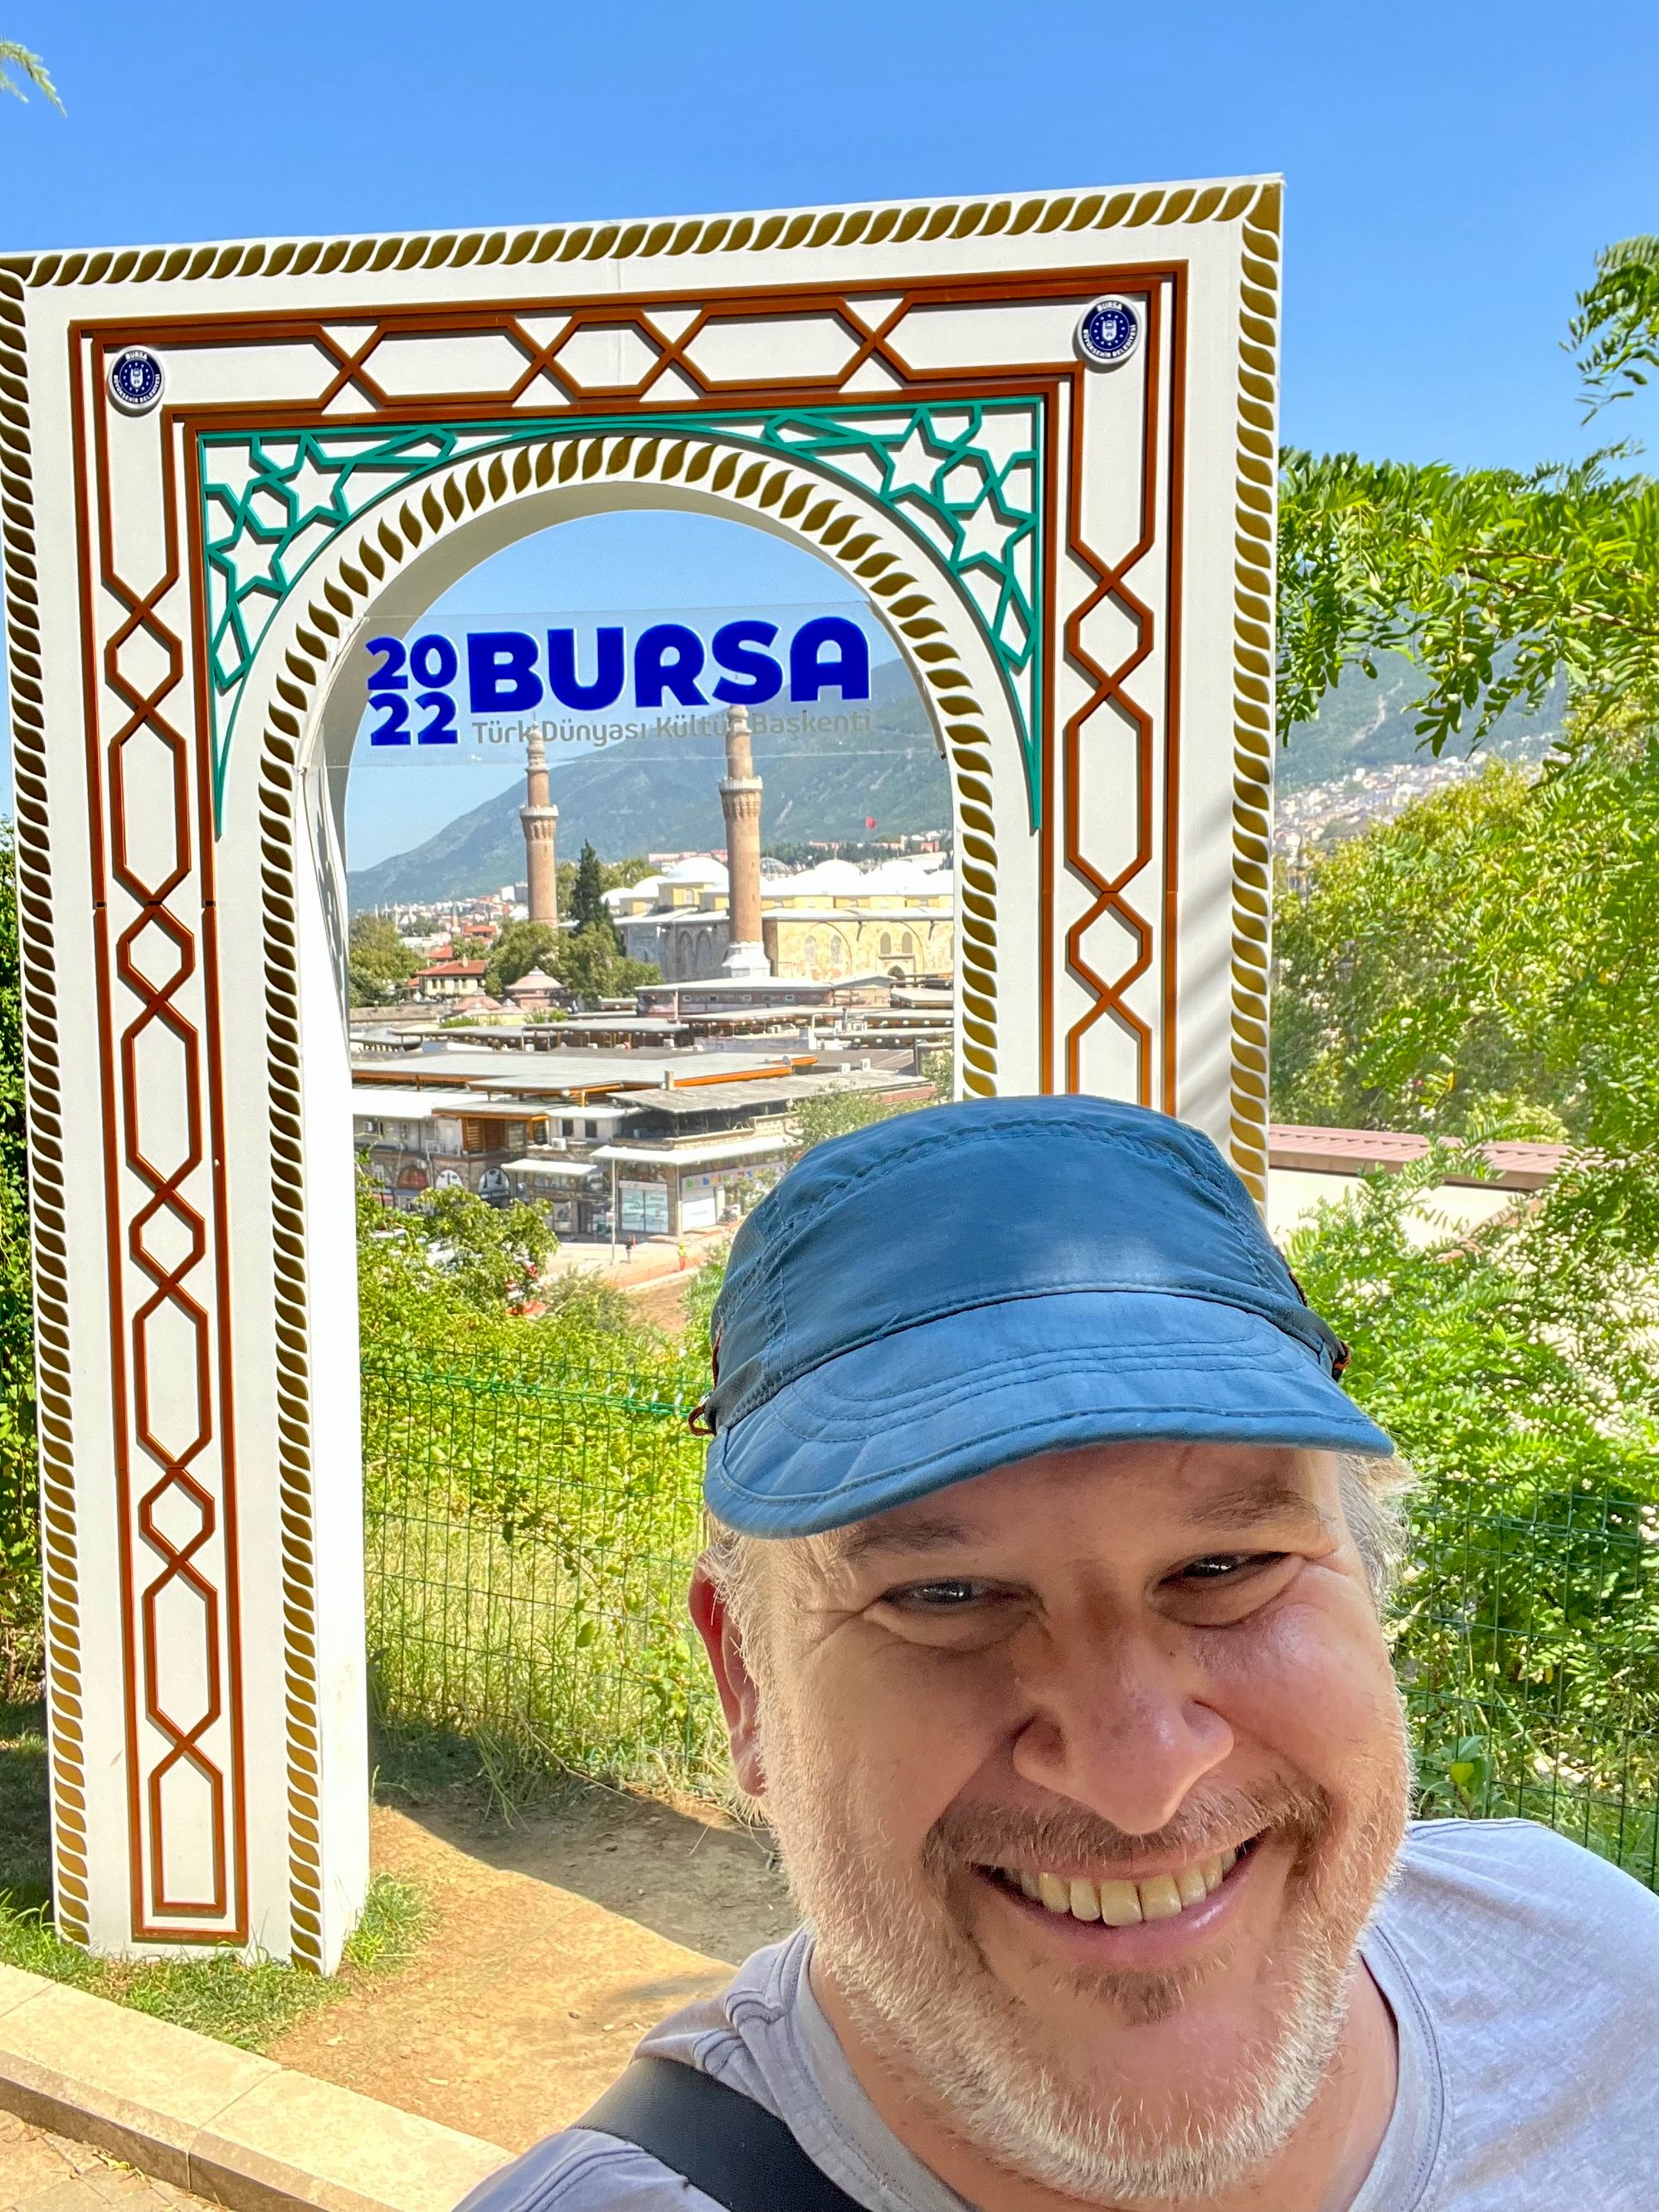 We were in Bursa - the first capital of the Ottoman Empire - in July of this year. I couldn't resist taking a selfie at this photo booth. In the background is the Grand Mosque of Bursa, which was built in 1399. 